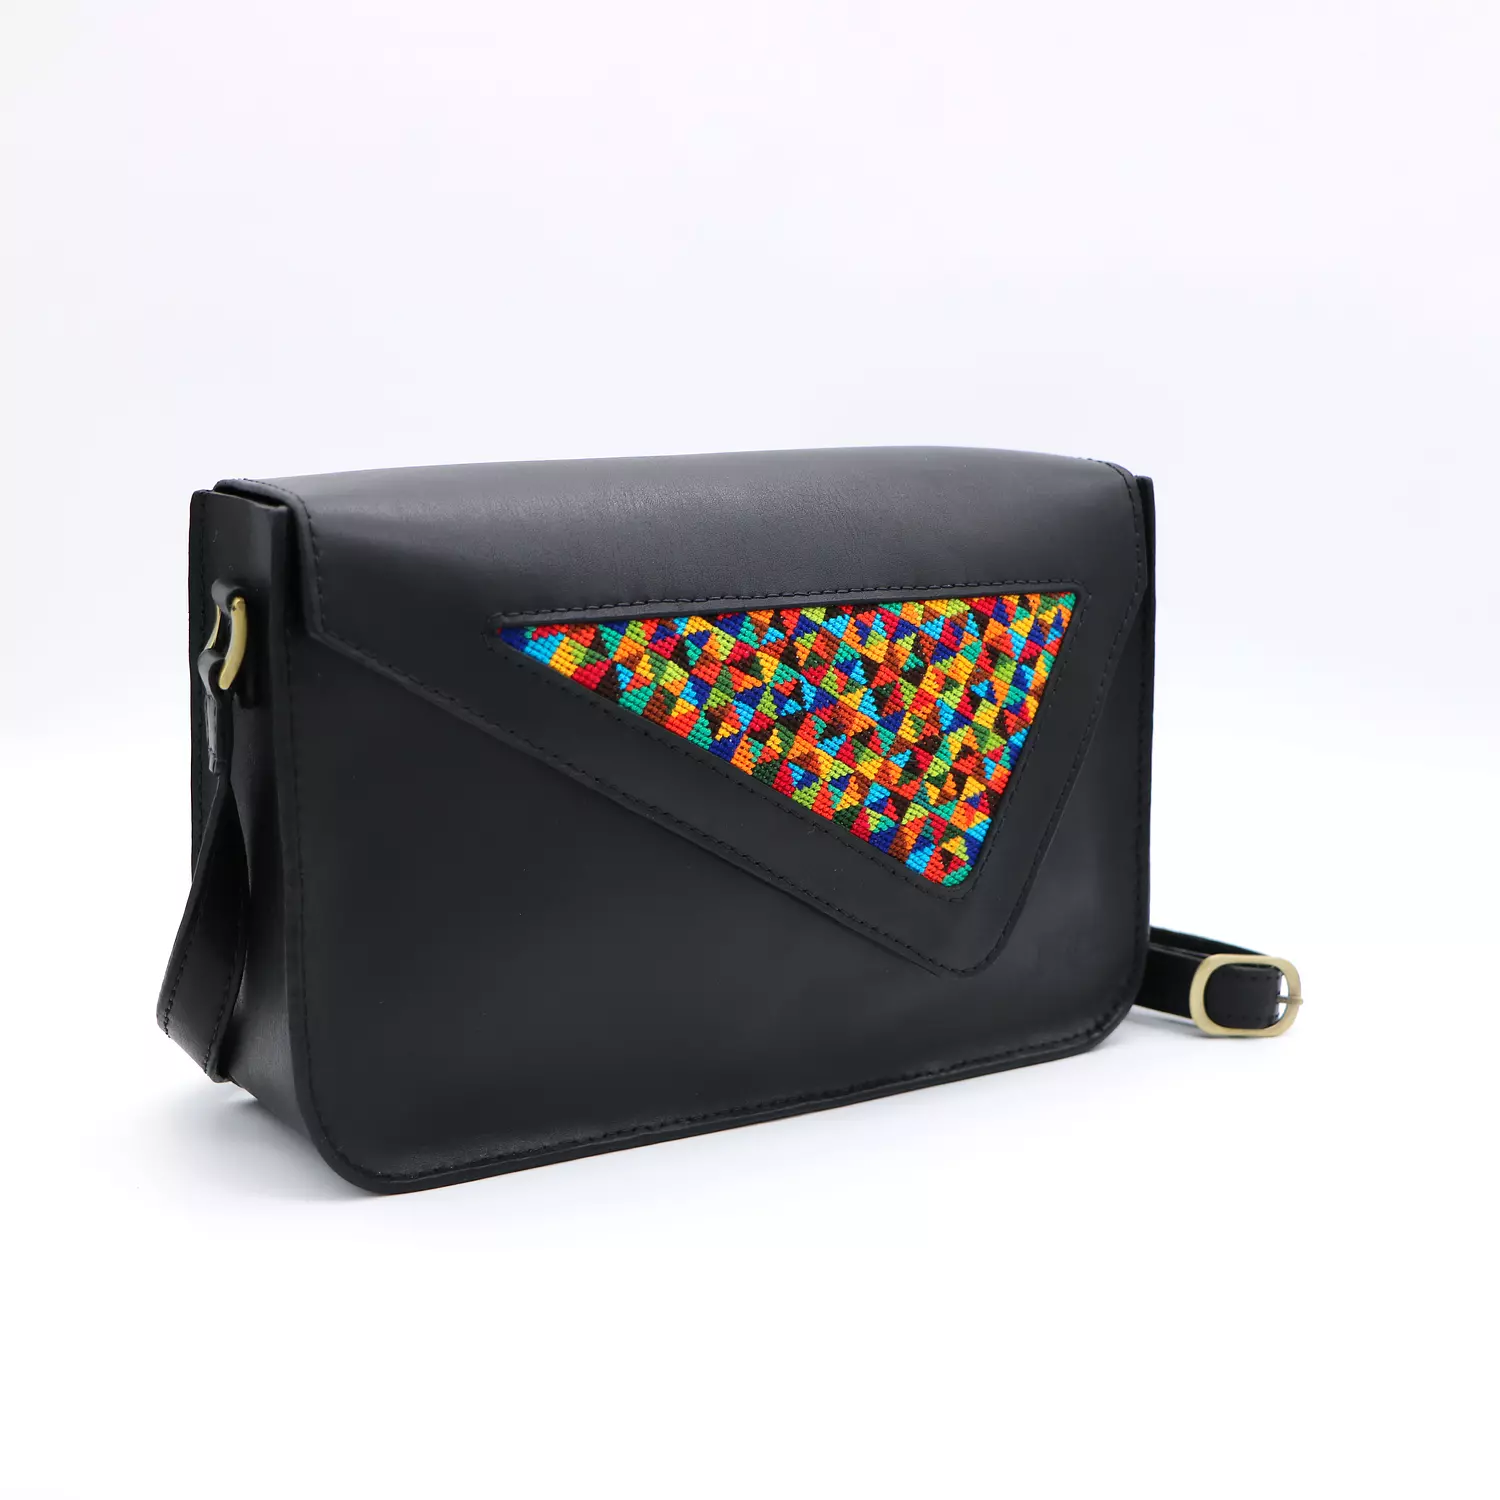 Genuine leather bag with colorful cross-stitching. hover image